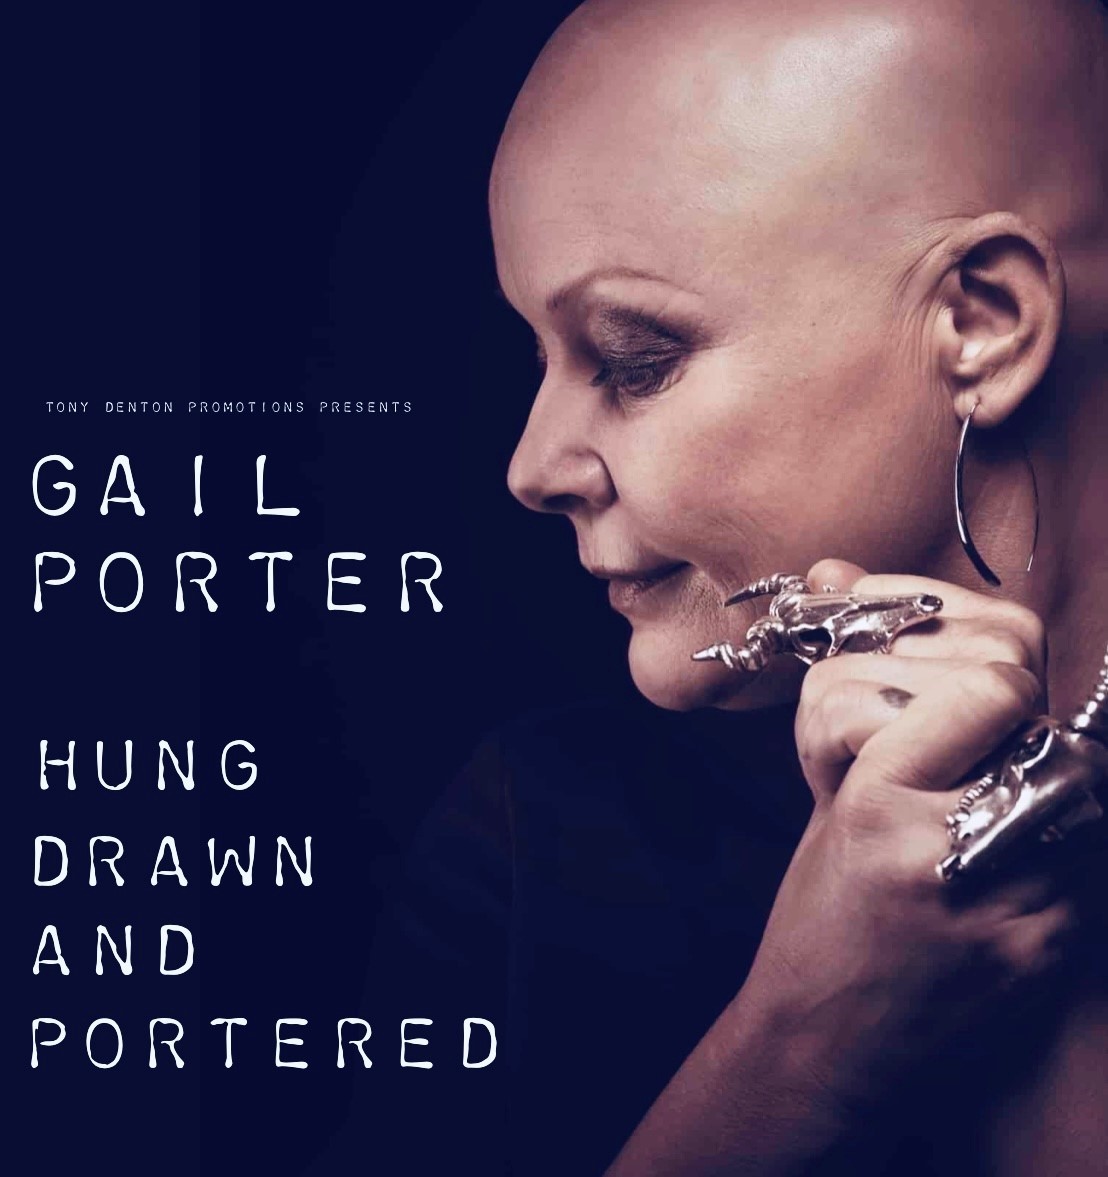 Gail Porter - Hung Drawn and Portered